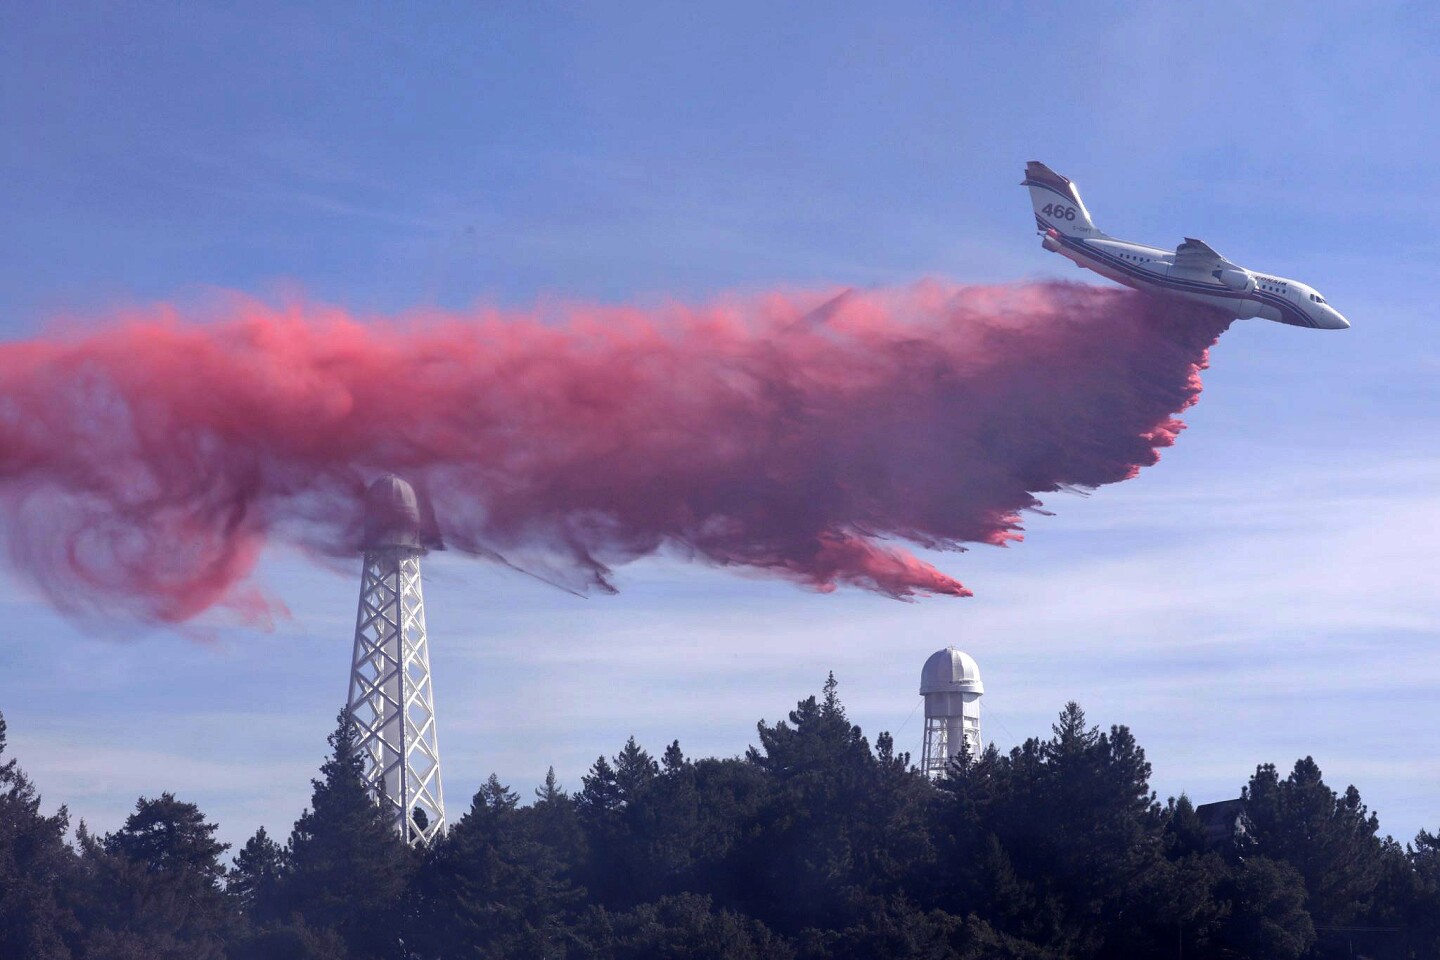 An air tanker drops fire retardant over the Mt. Wilson Observatory as firefighters worked to extinguish a fire in the Angeles National Forest.